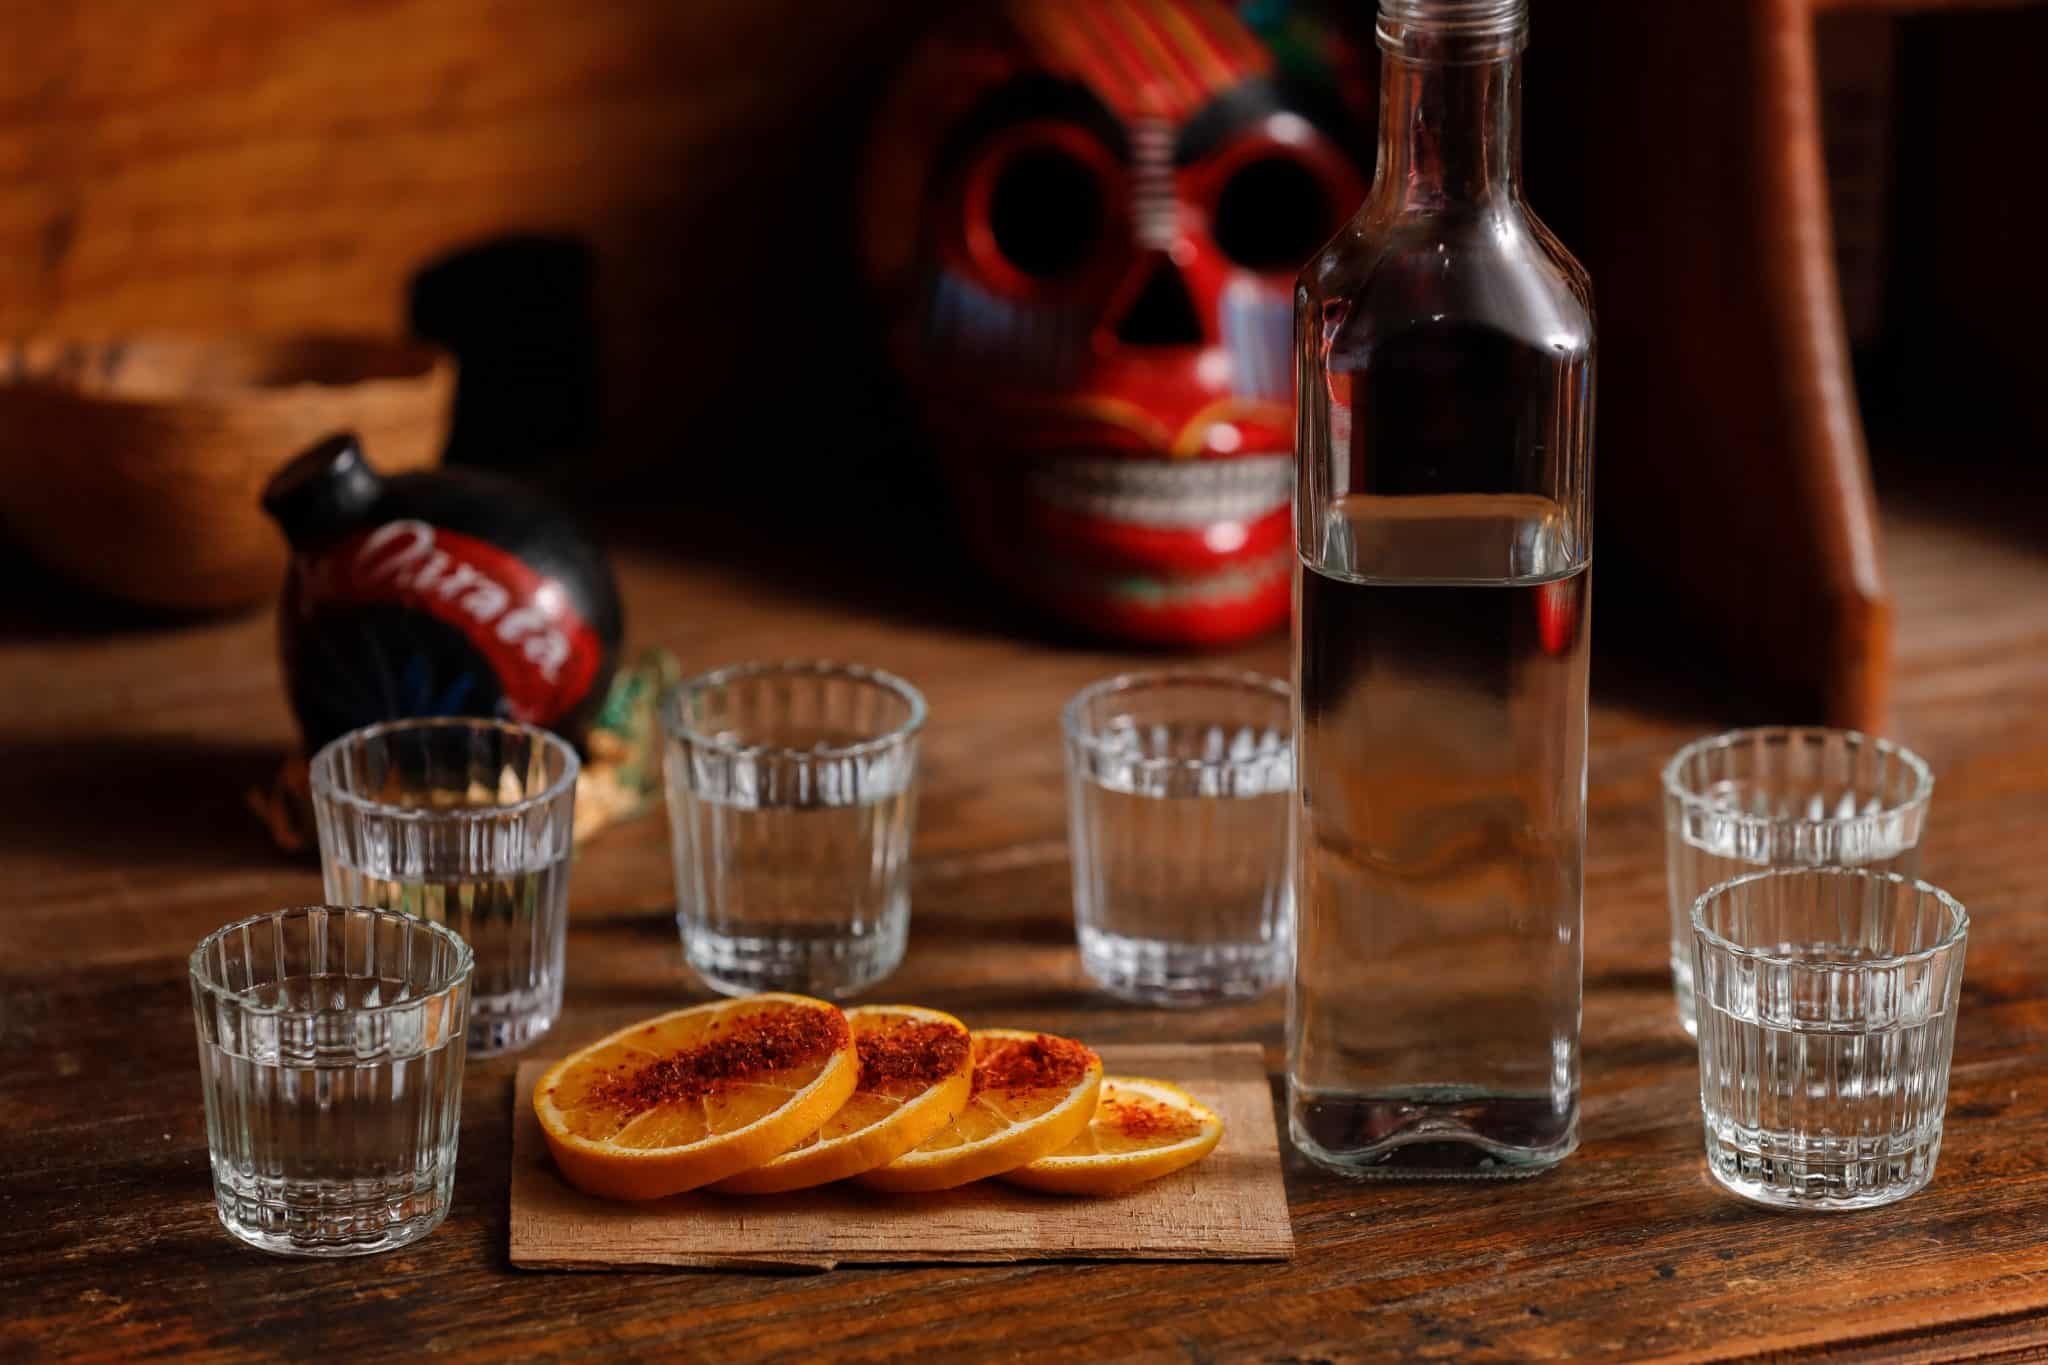 A bottle of mezcal with six shot glasses and four spiced orange slices on a wooden board.